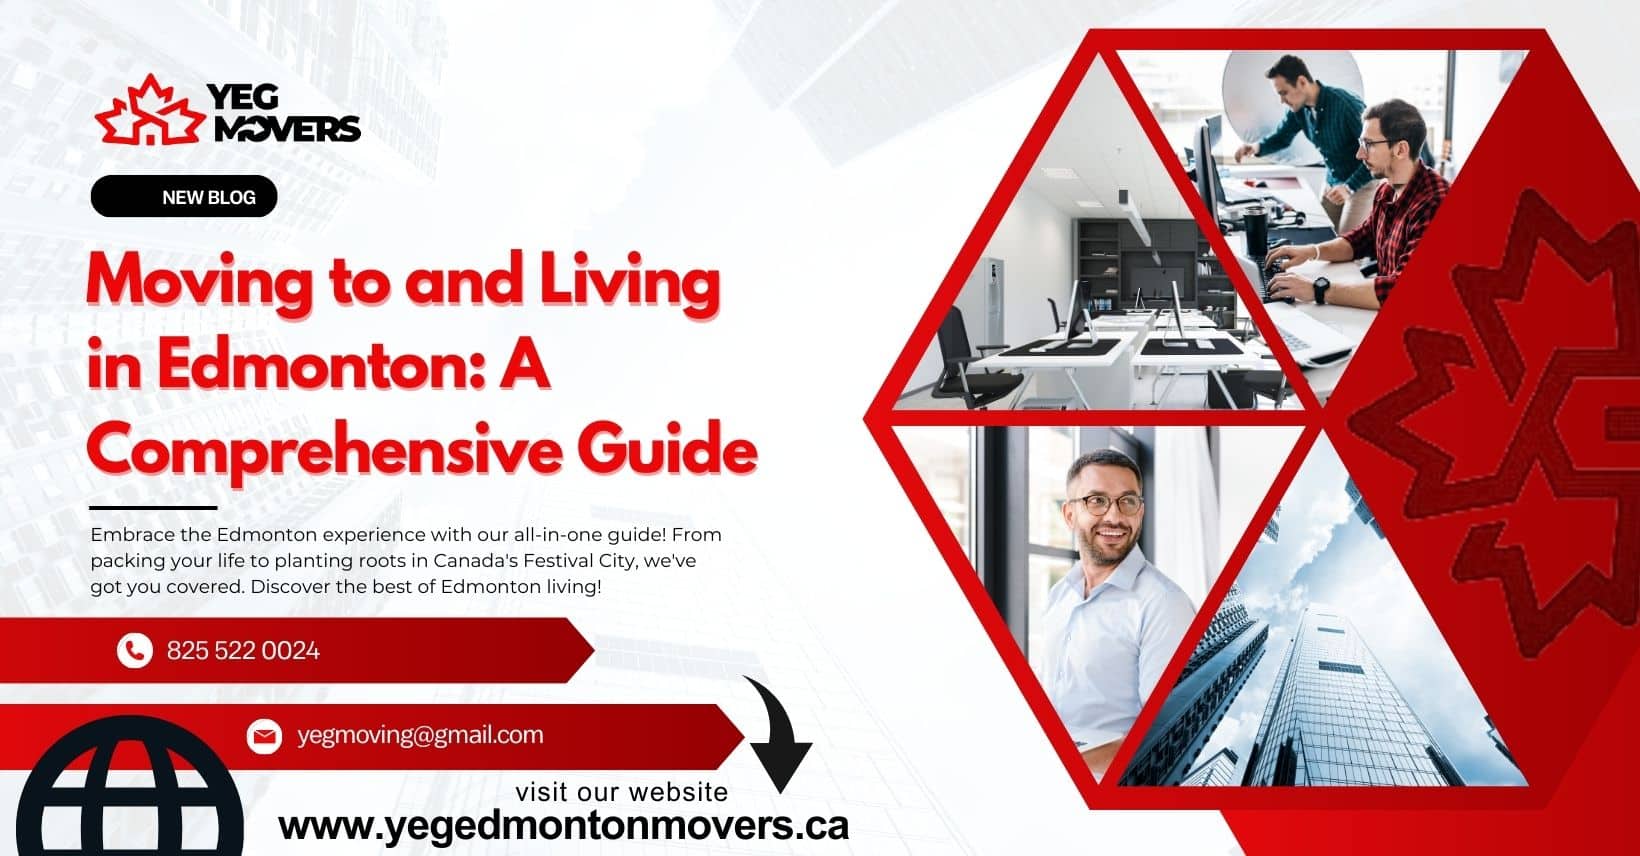 Moving to and Living in Edmonton: A Comprehensive Guide